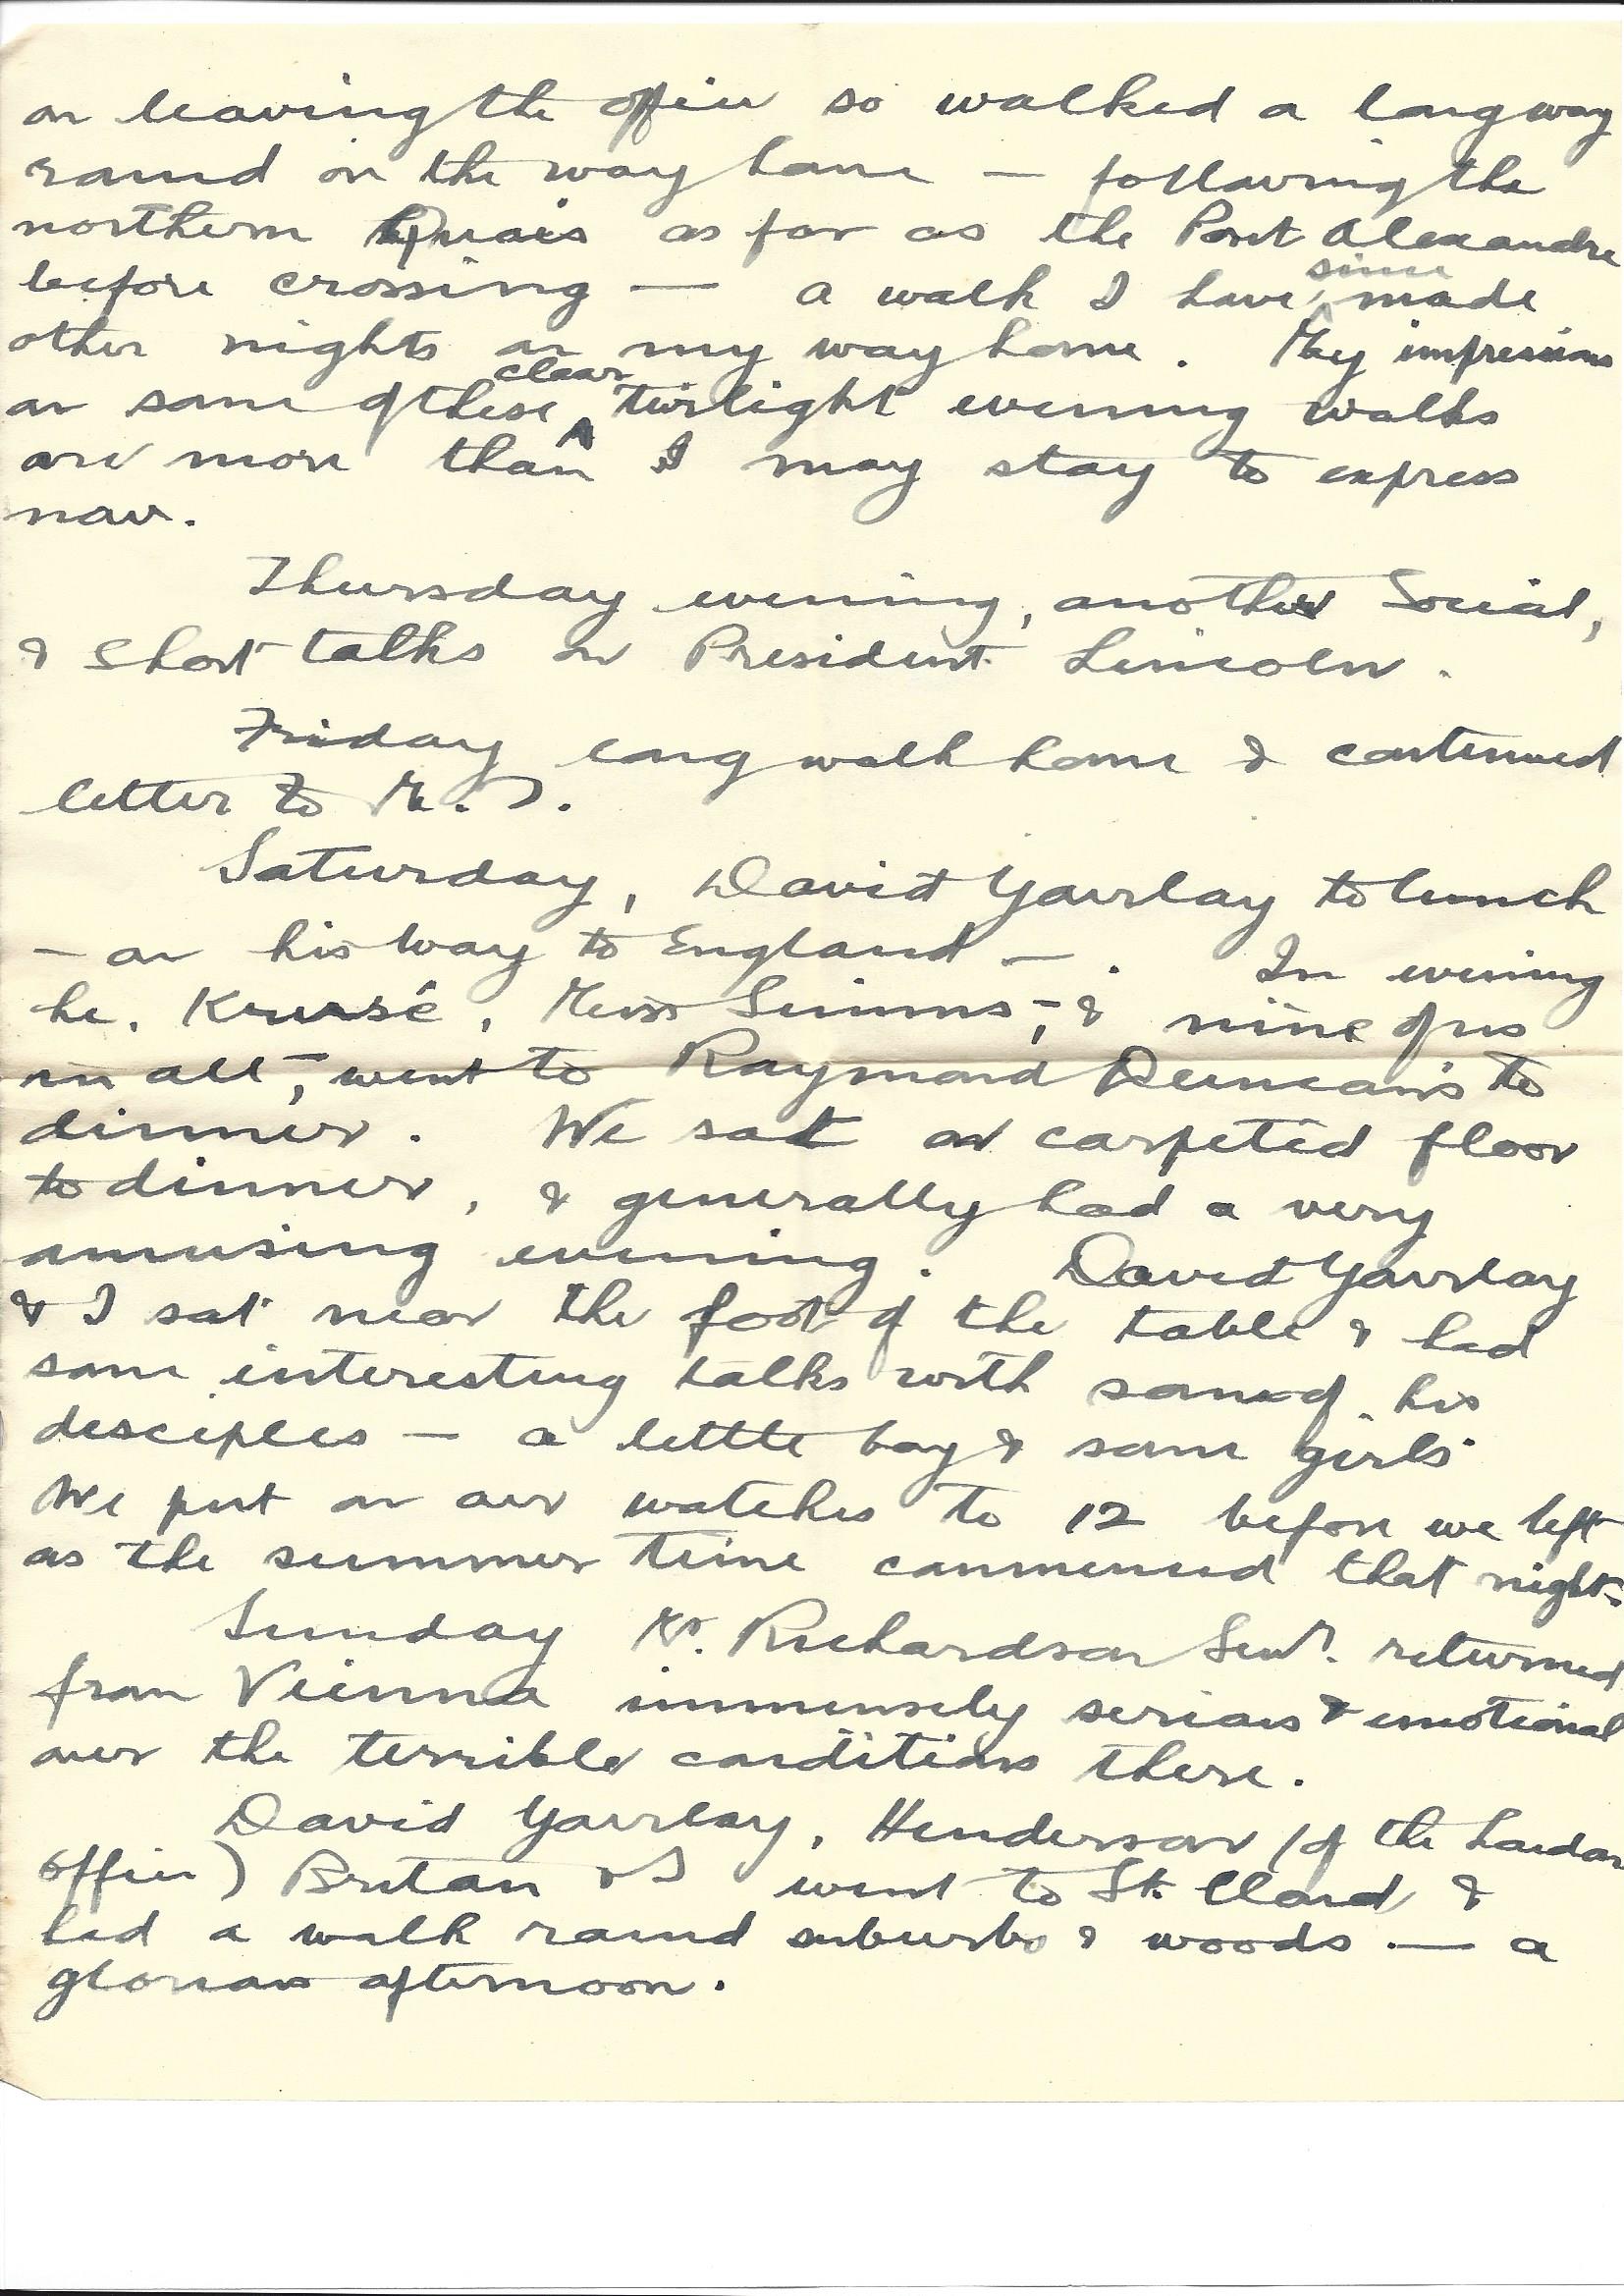 1920-02-17 page 3 letter by Donald Bearman